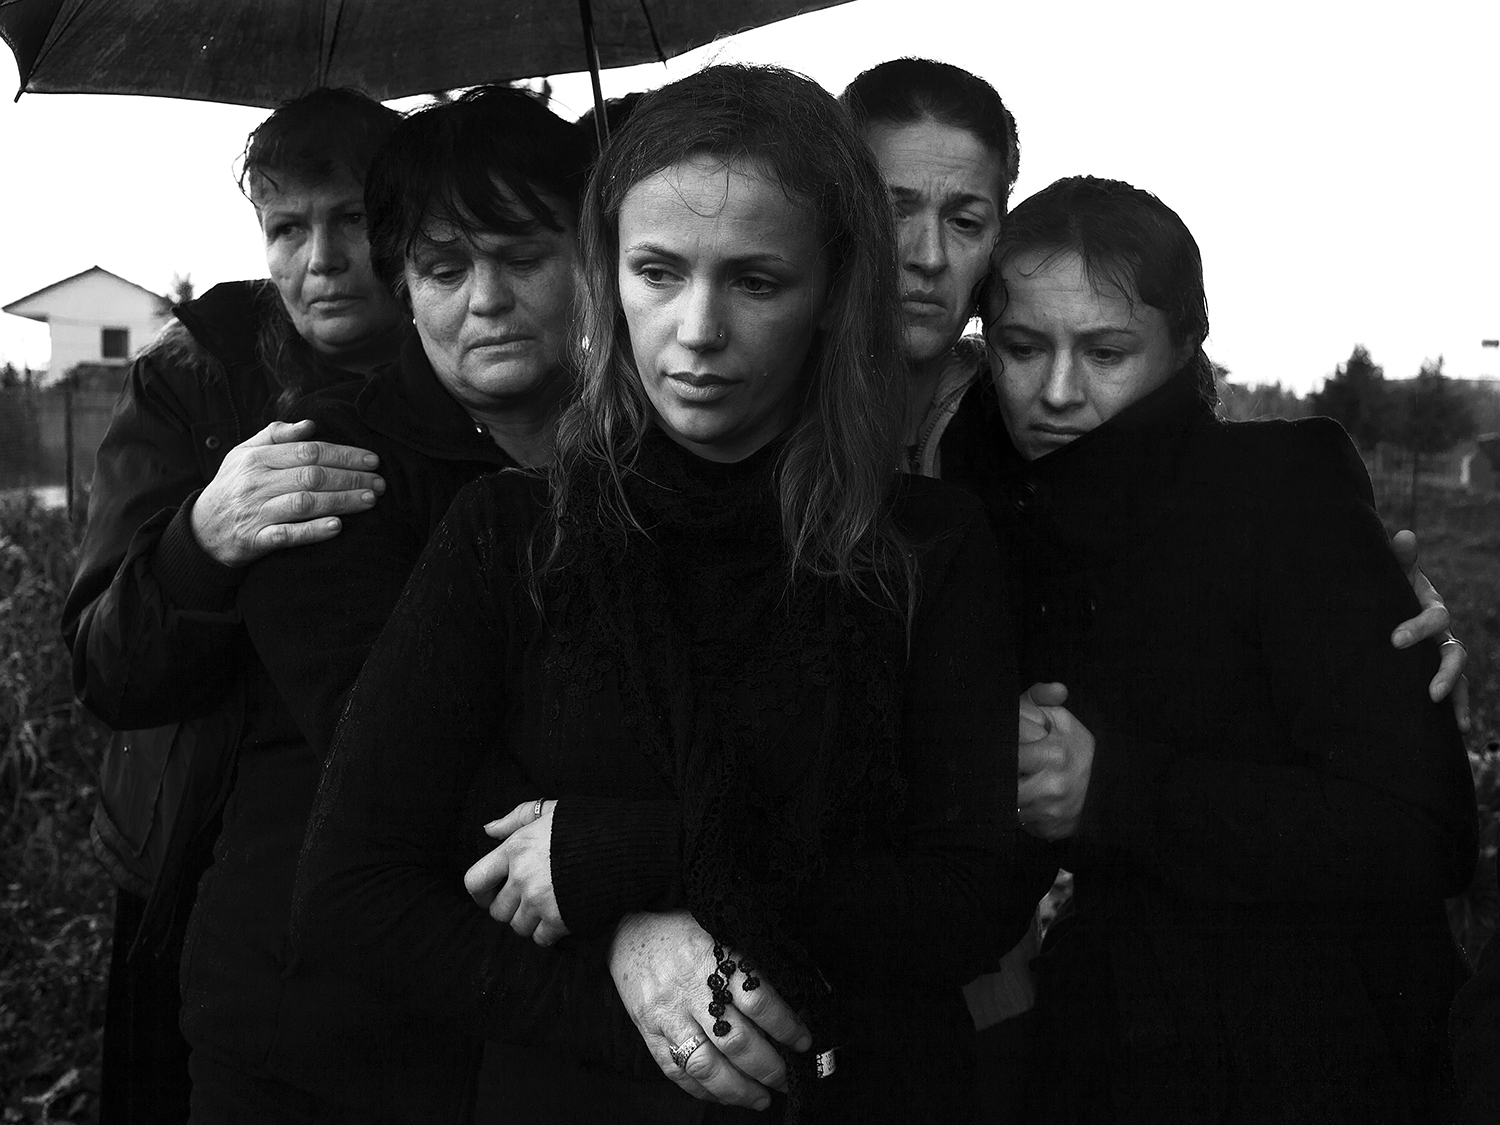 During a funeral. According to Albanian tradition, men and women are attending a funeral in seperate groups.
Tirana, Albania, 2012